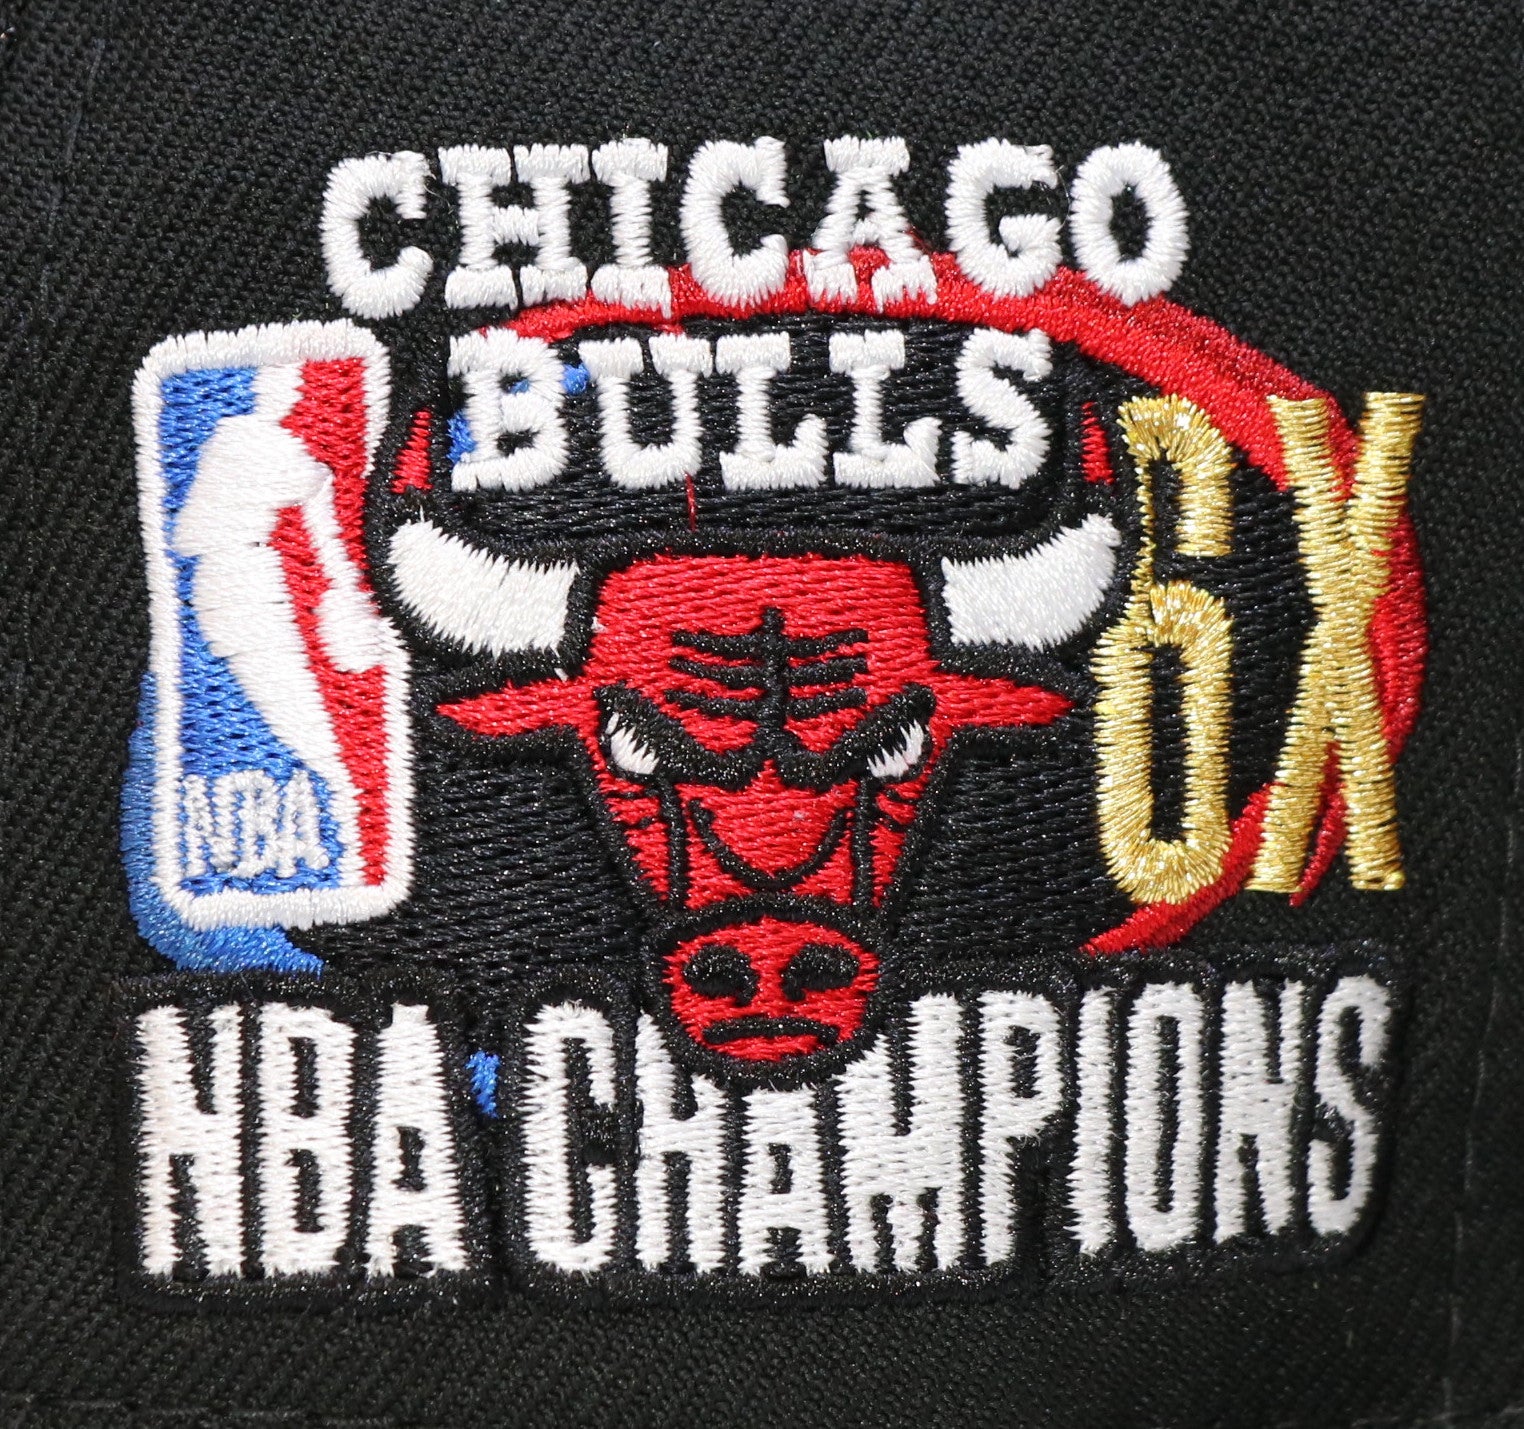 CHICAGO BULLS "6X CHAMPS" NEW ERA 59FIFTY FITTED (LAST DANCE) (PINK BOTTOM)